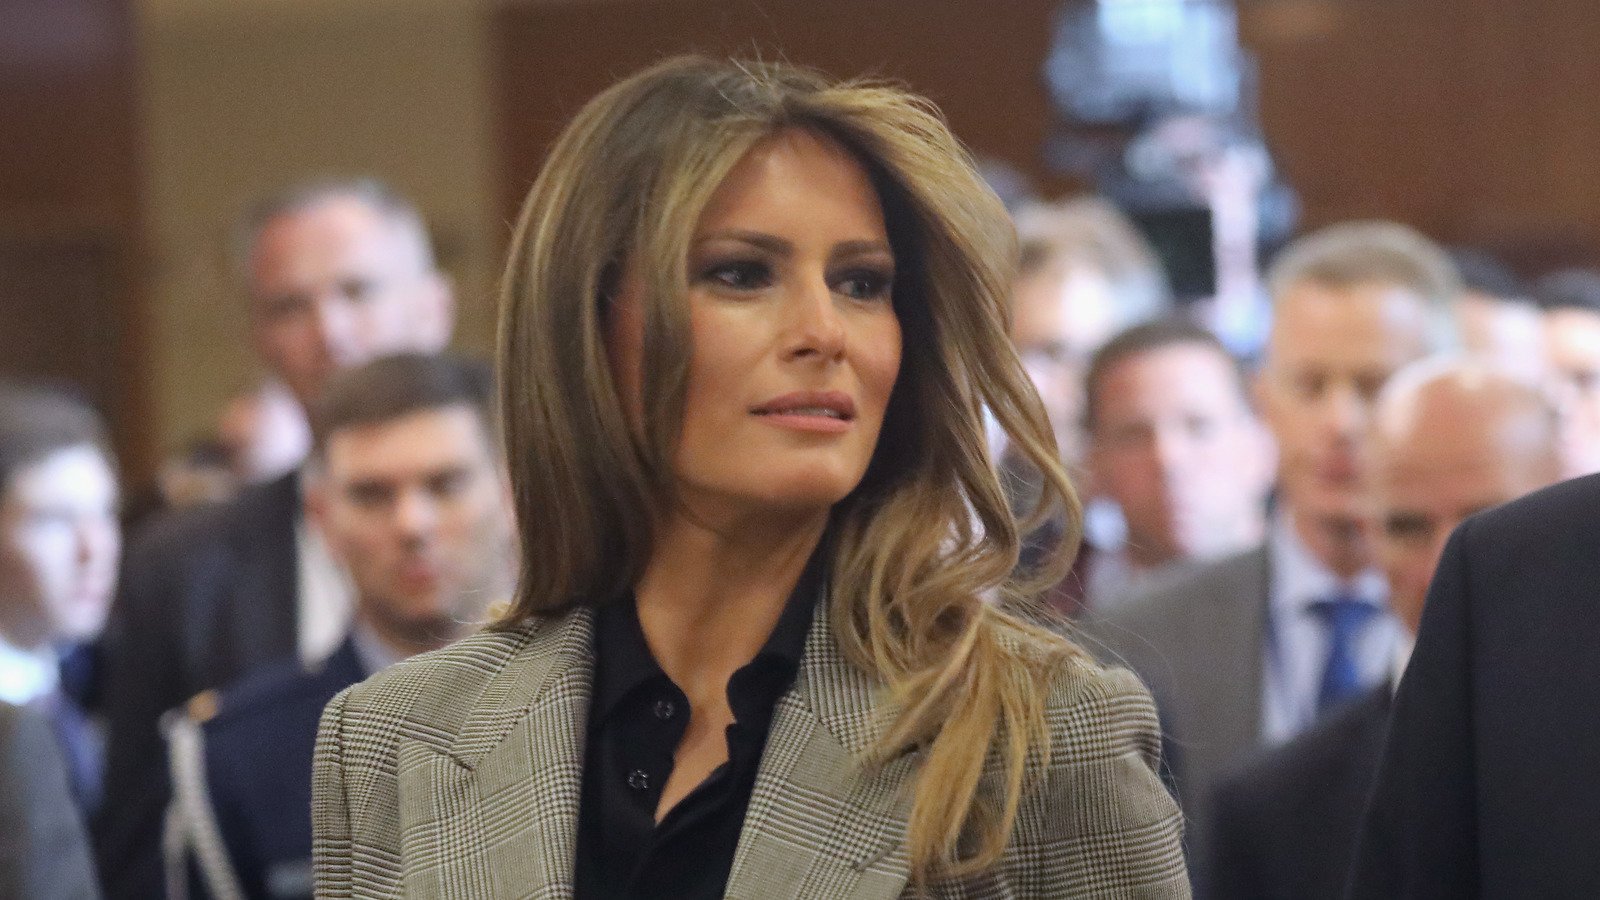 Melania Trump Has A New Office To Continue Her Work. Here's What We Know